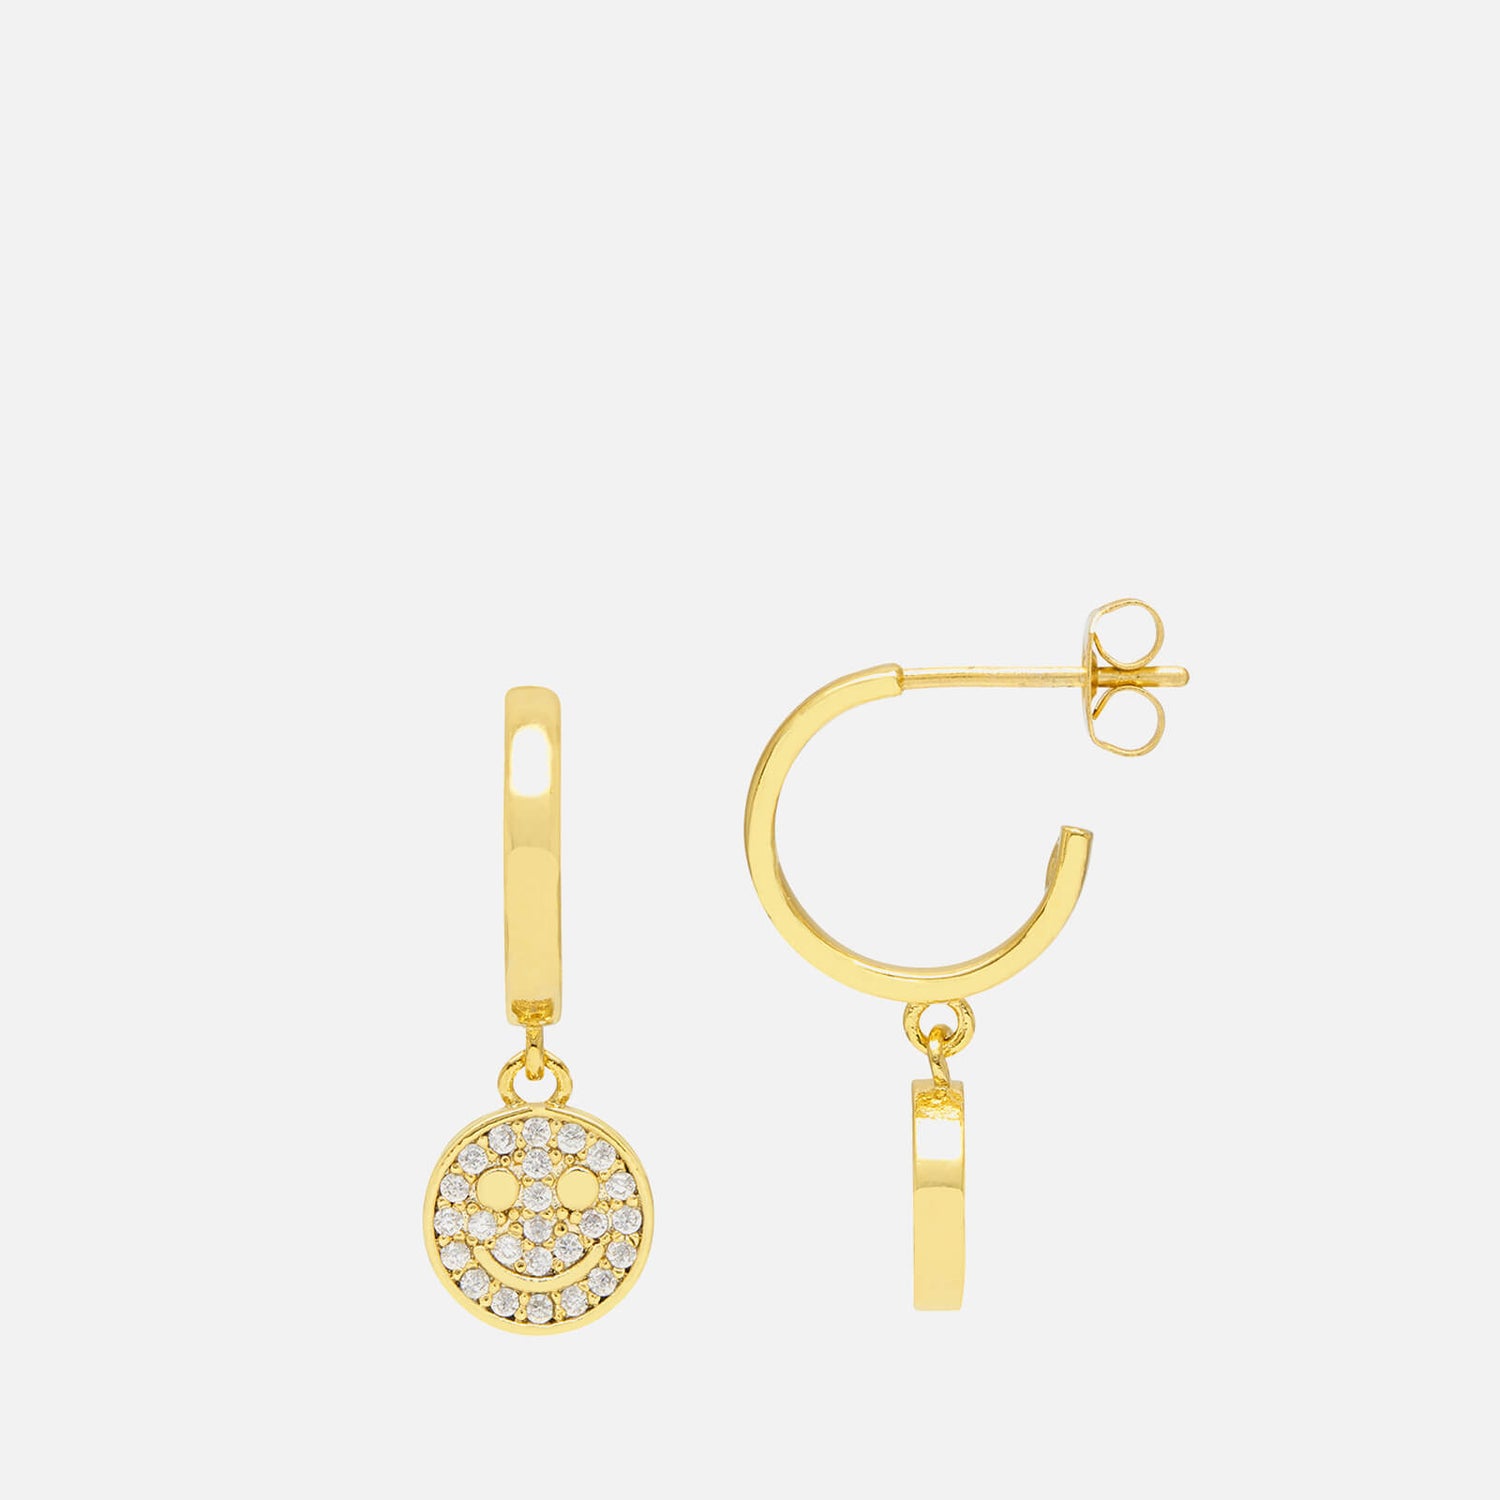 Estella Bartlett Smiley Gold-Plated and Crystal Hoop Earrings